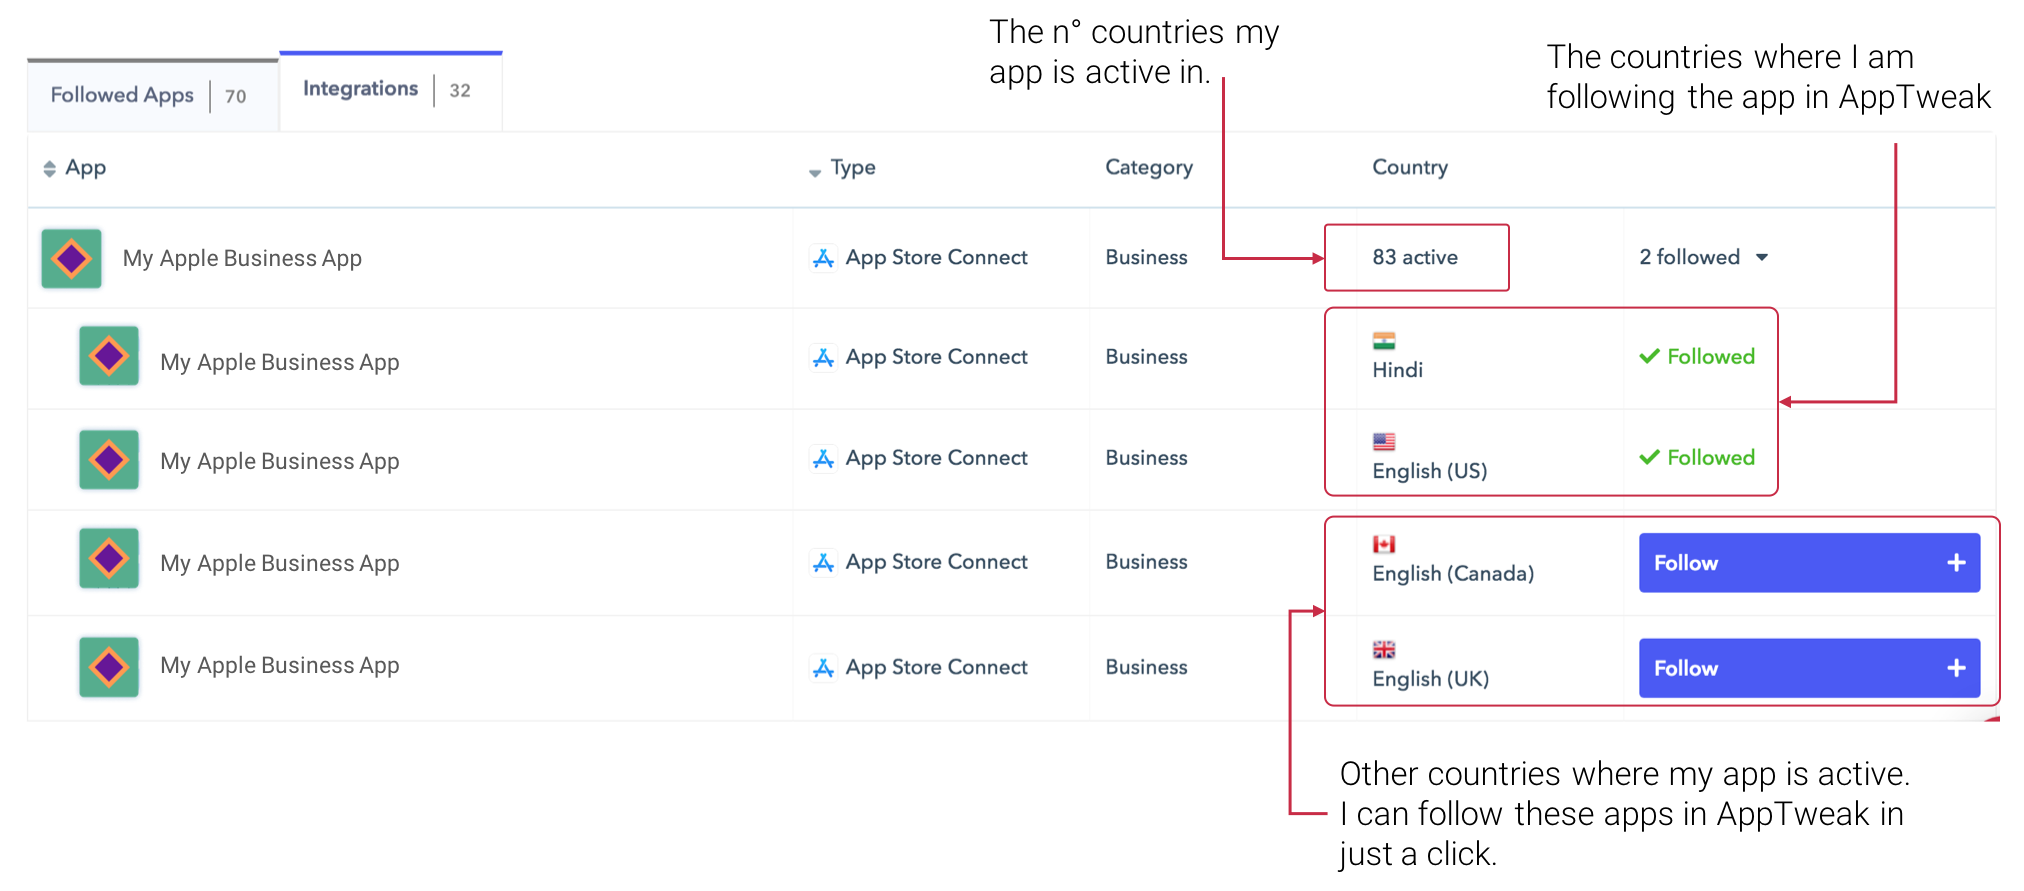 AppTweak ASO Tool: Select the apps and countries you want to follow in your AppTweak Dashboard